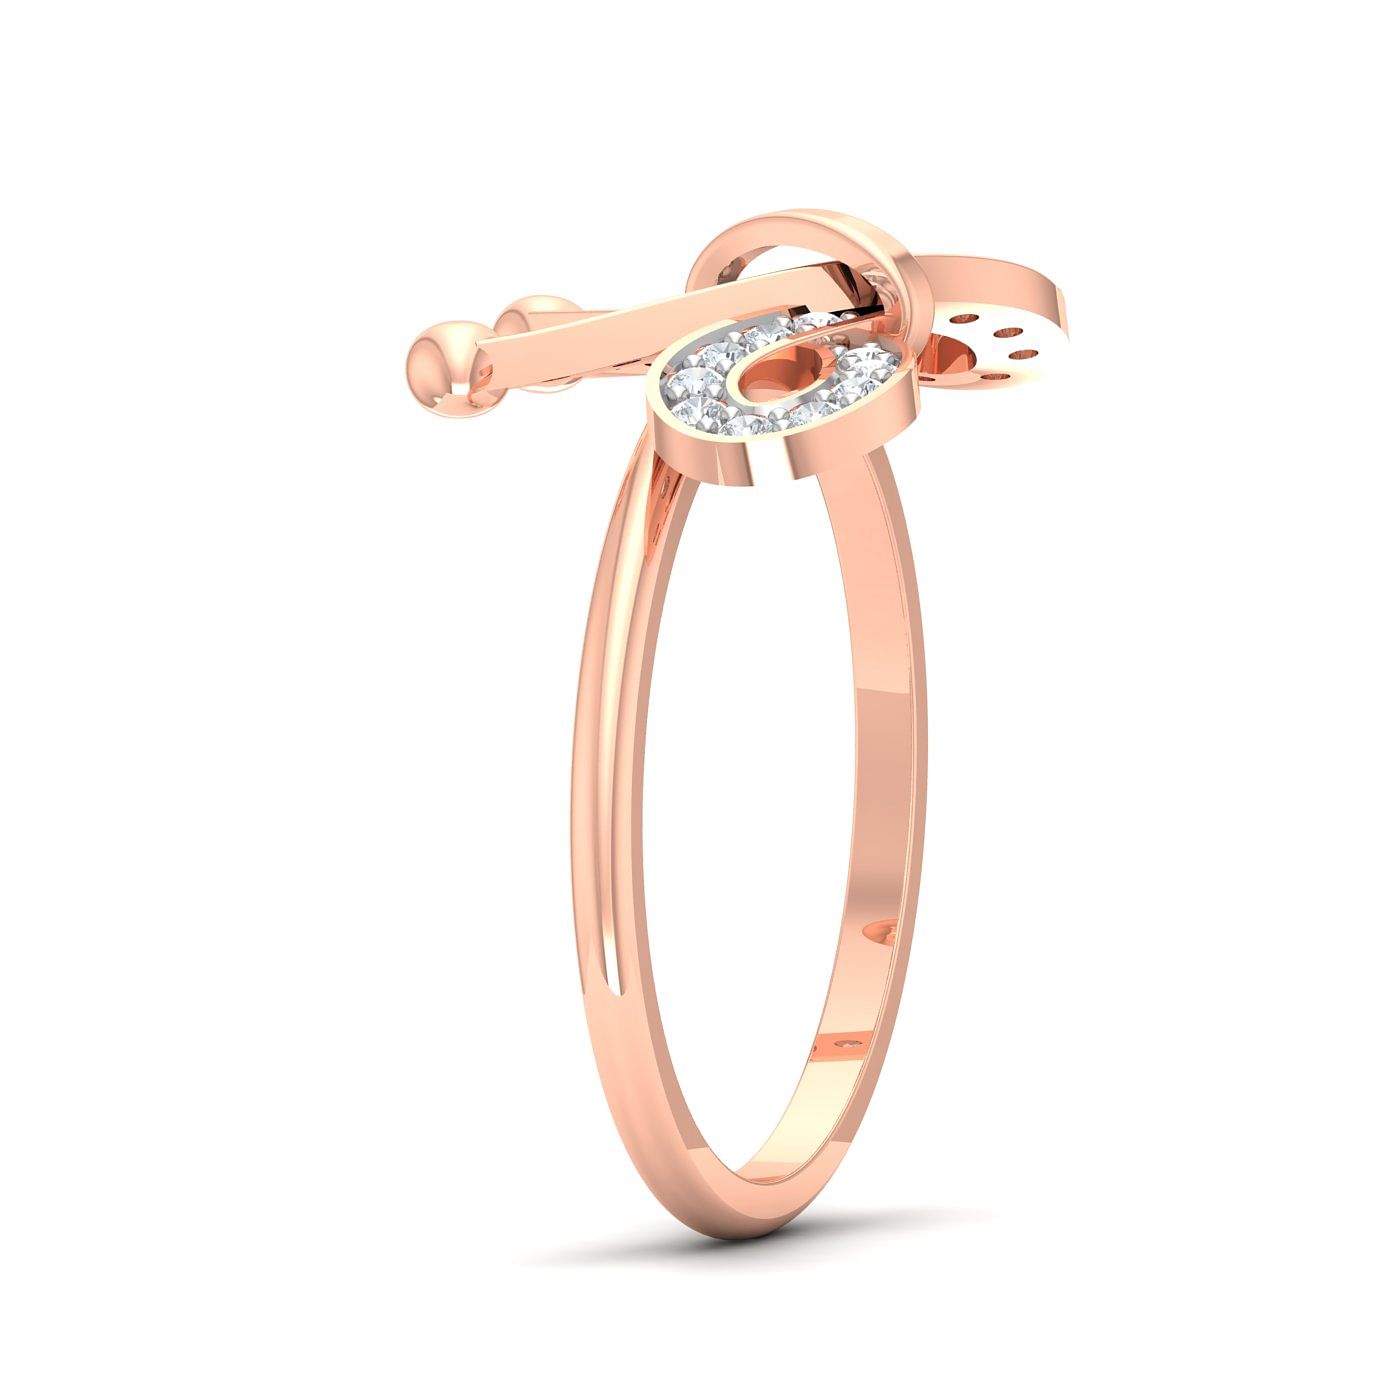 Bow Knot Diamond Ring With Rose Gold For Women